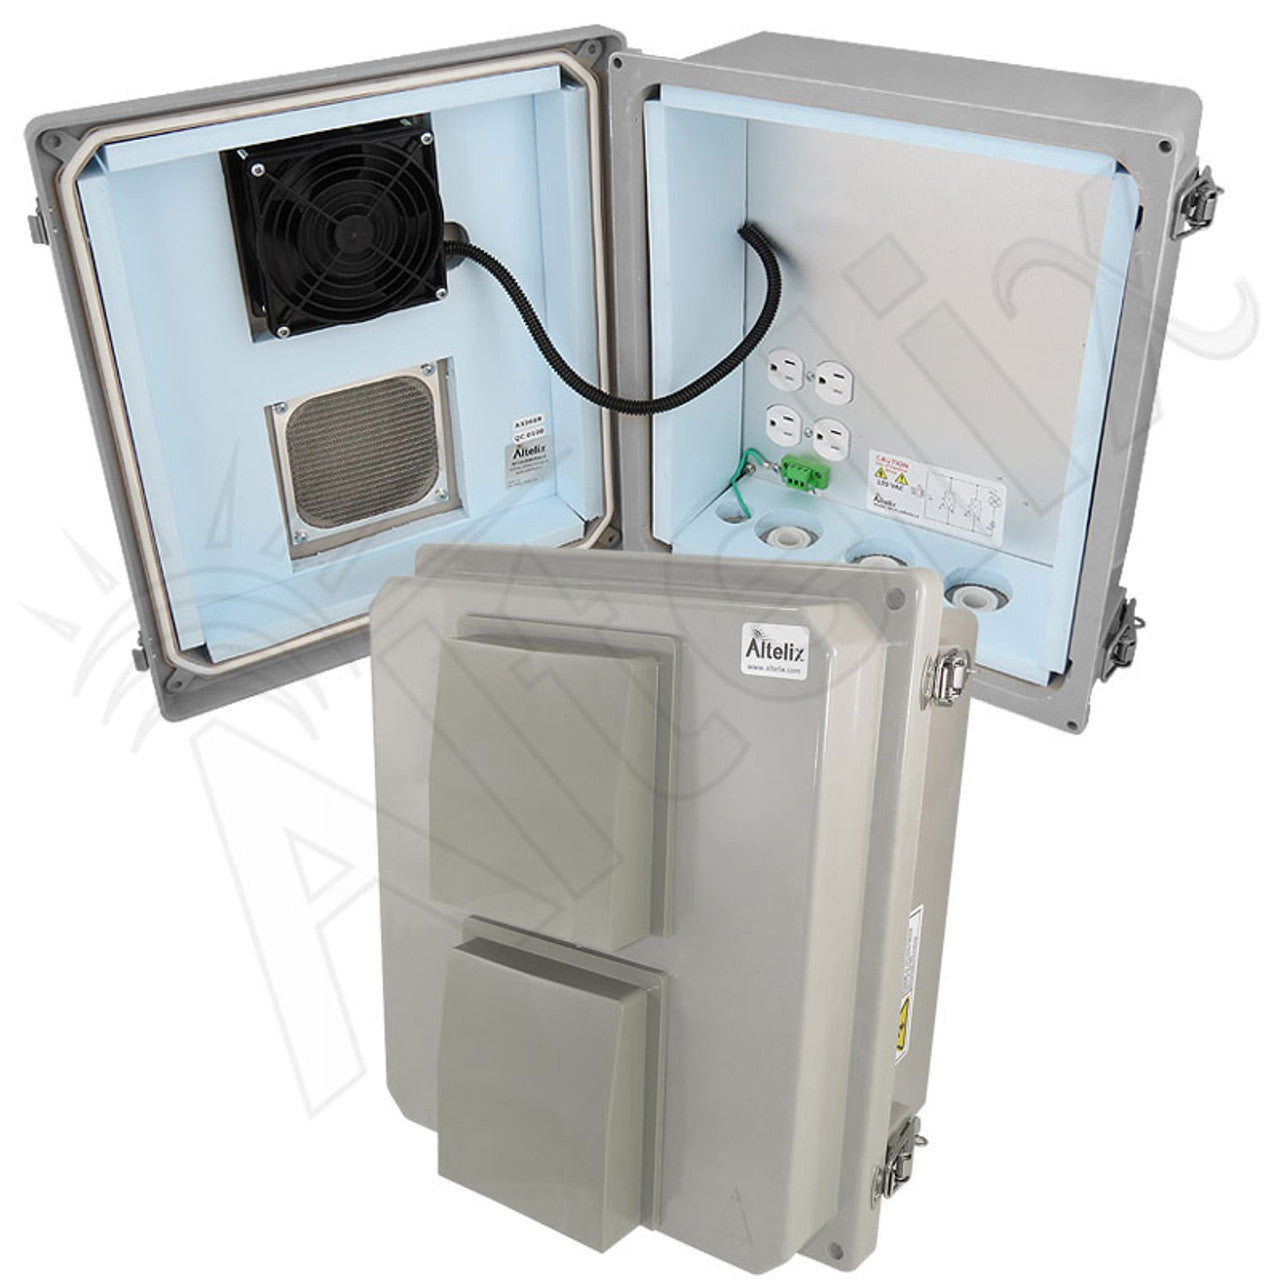 Altelix 14x12x8 Insulated Fiberglass Vented Weatherproof NEMA Enclosure with Cooling Fan, 120 VAC Outlets & Power Cord